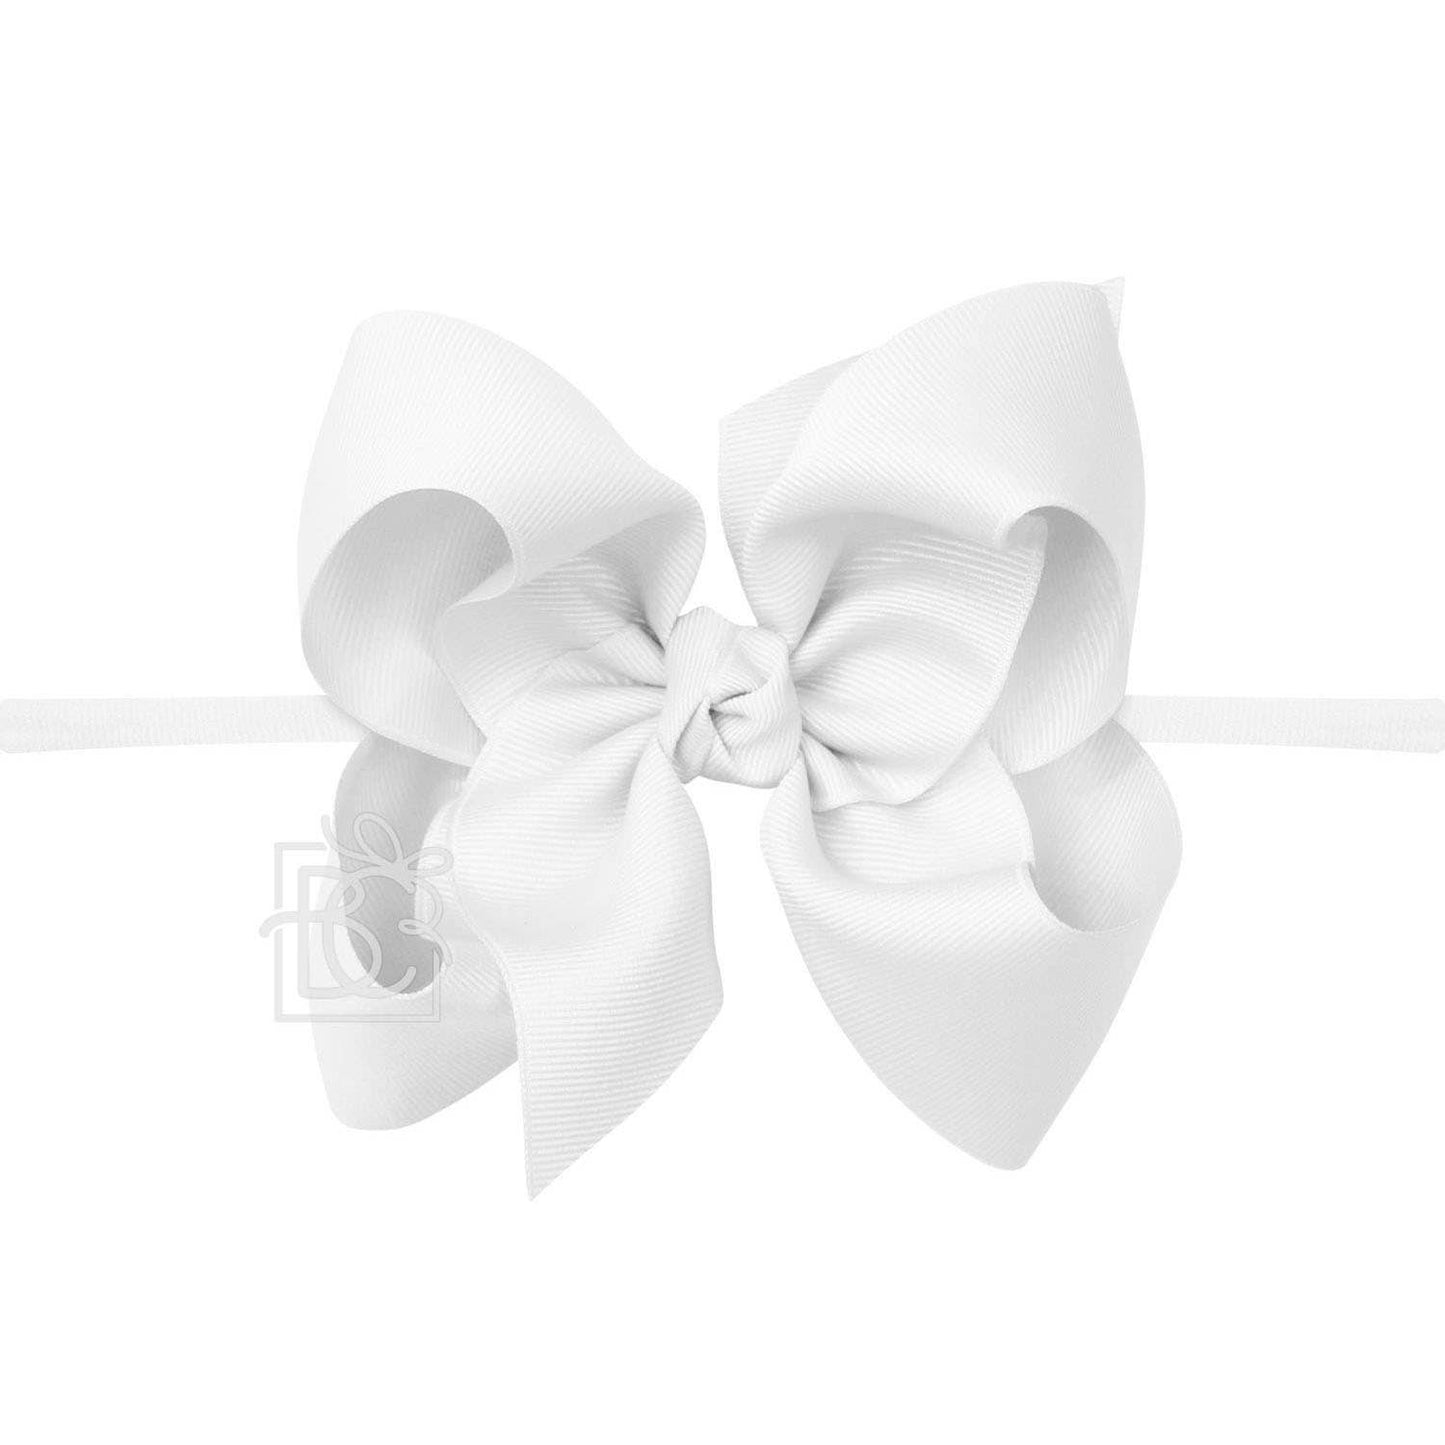 Nylon Headband with Huge Bow in White  - Doodlebug's Children's Boutique